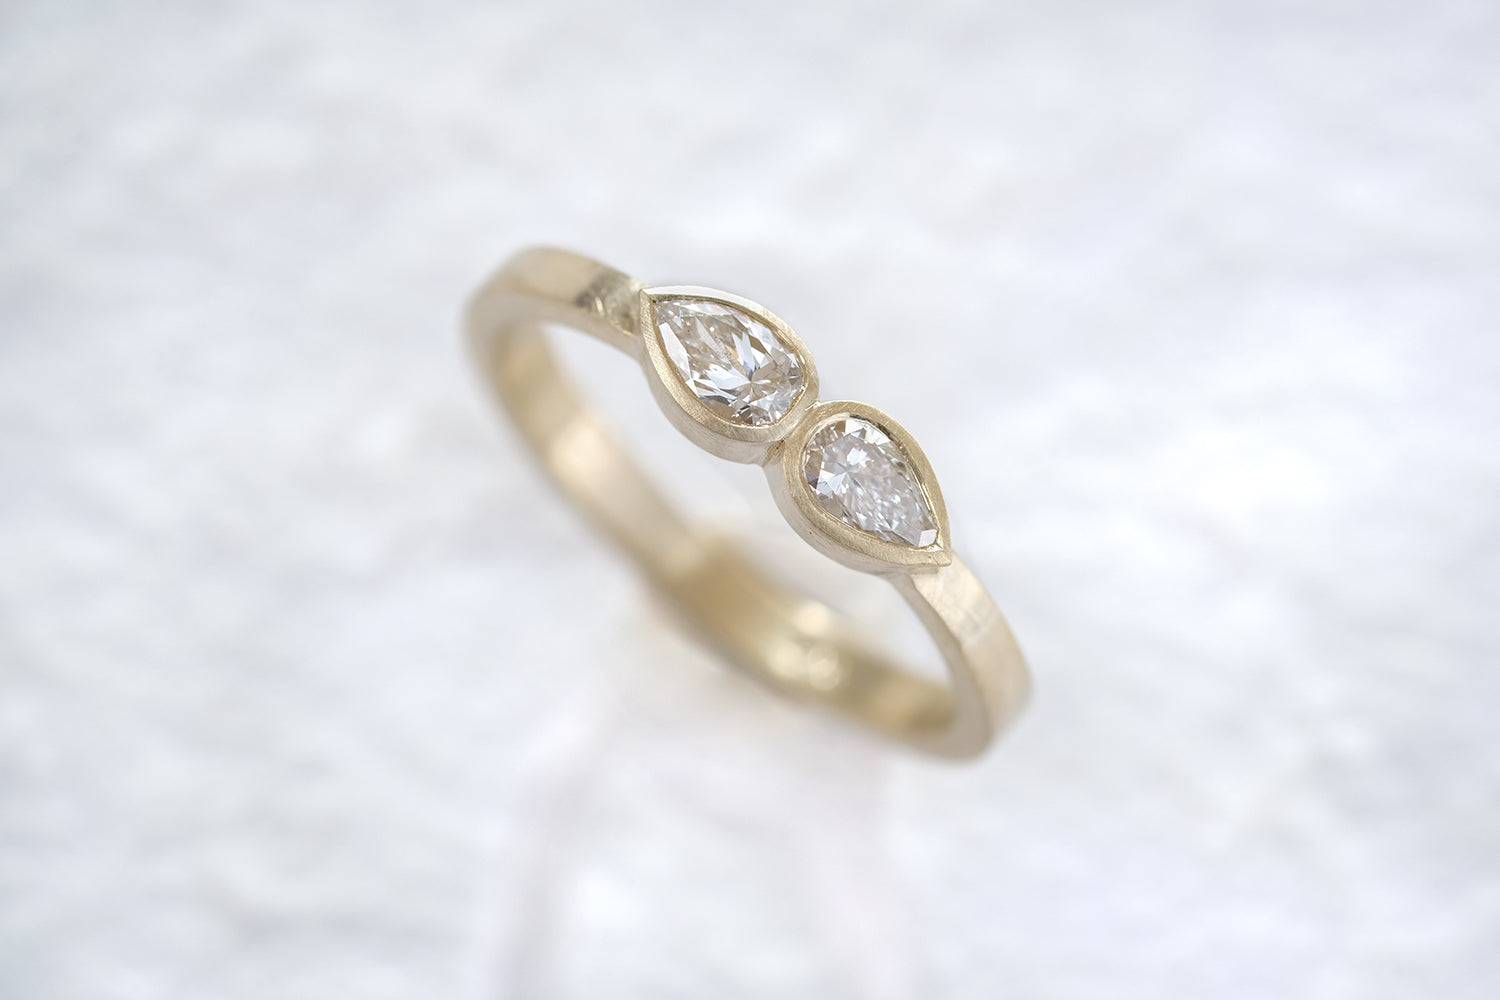 Gold Engagement Ring Set With A Pair Of Drop-Shaped Diamonds